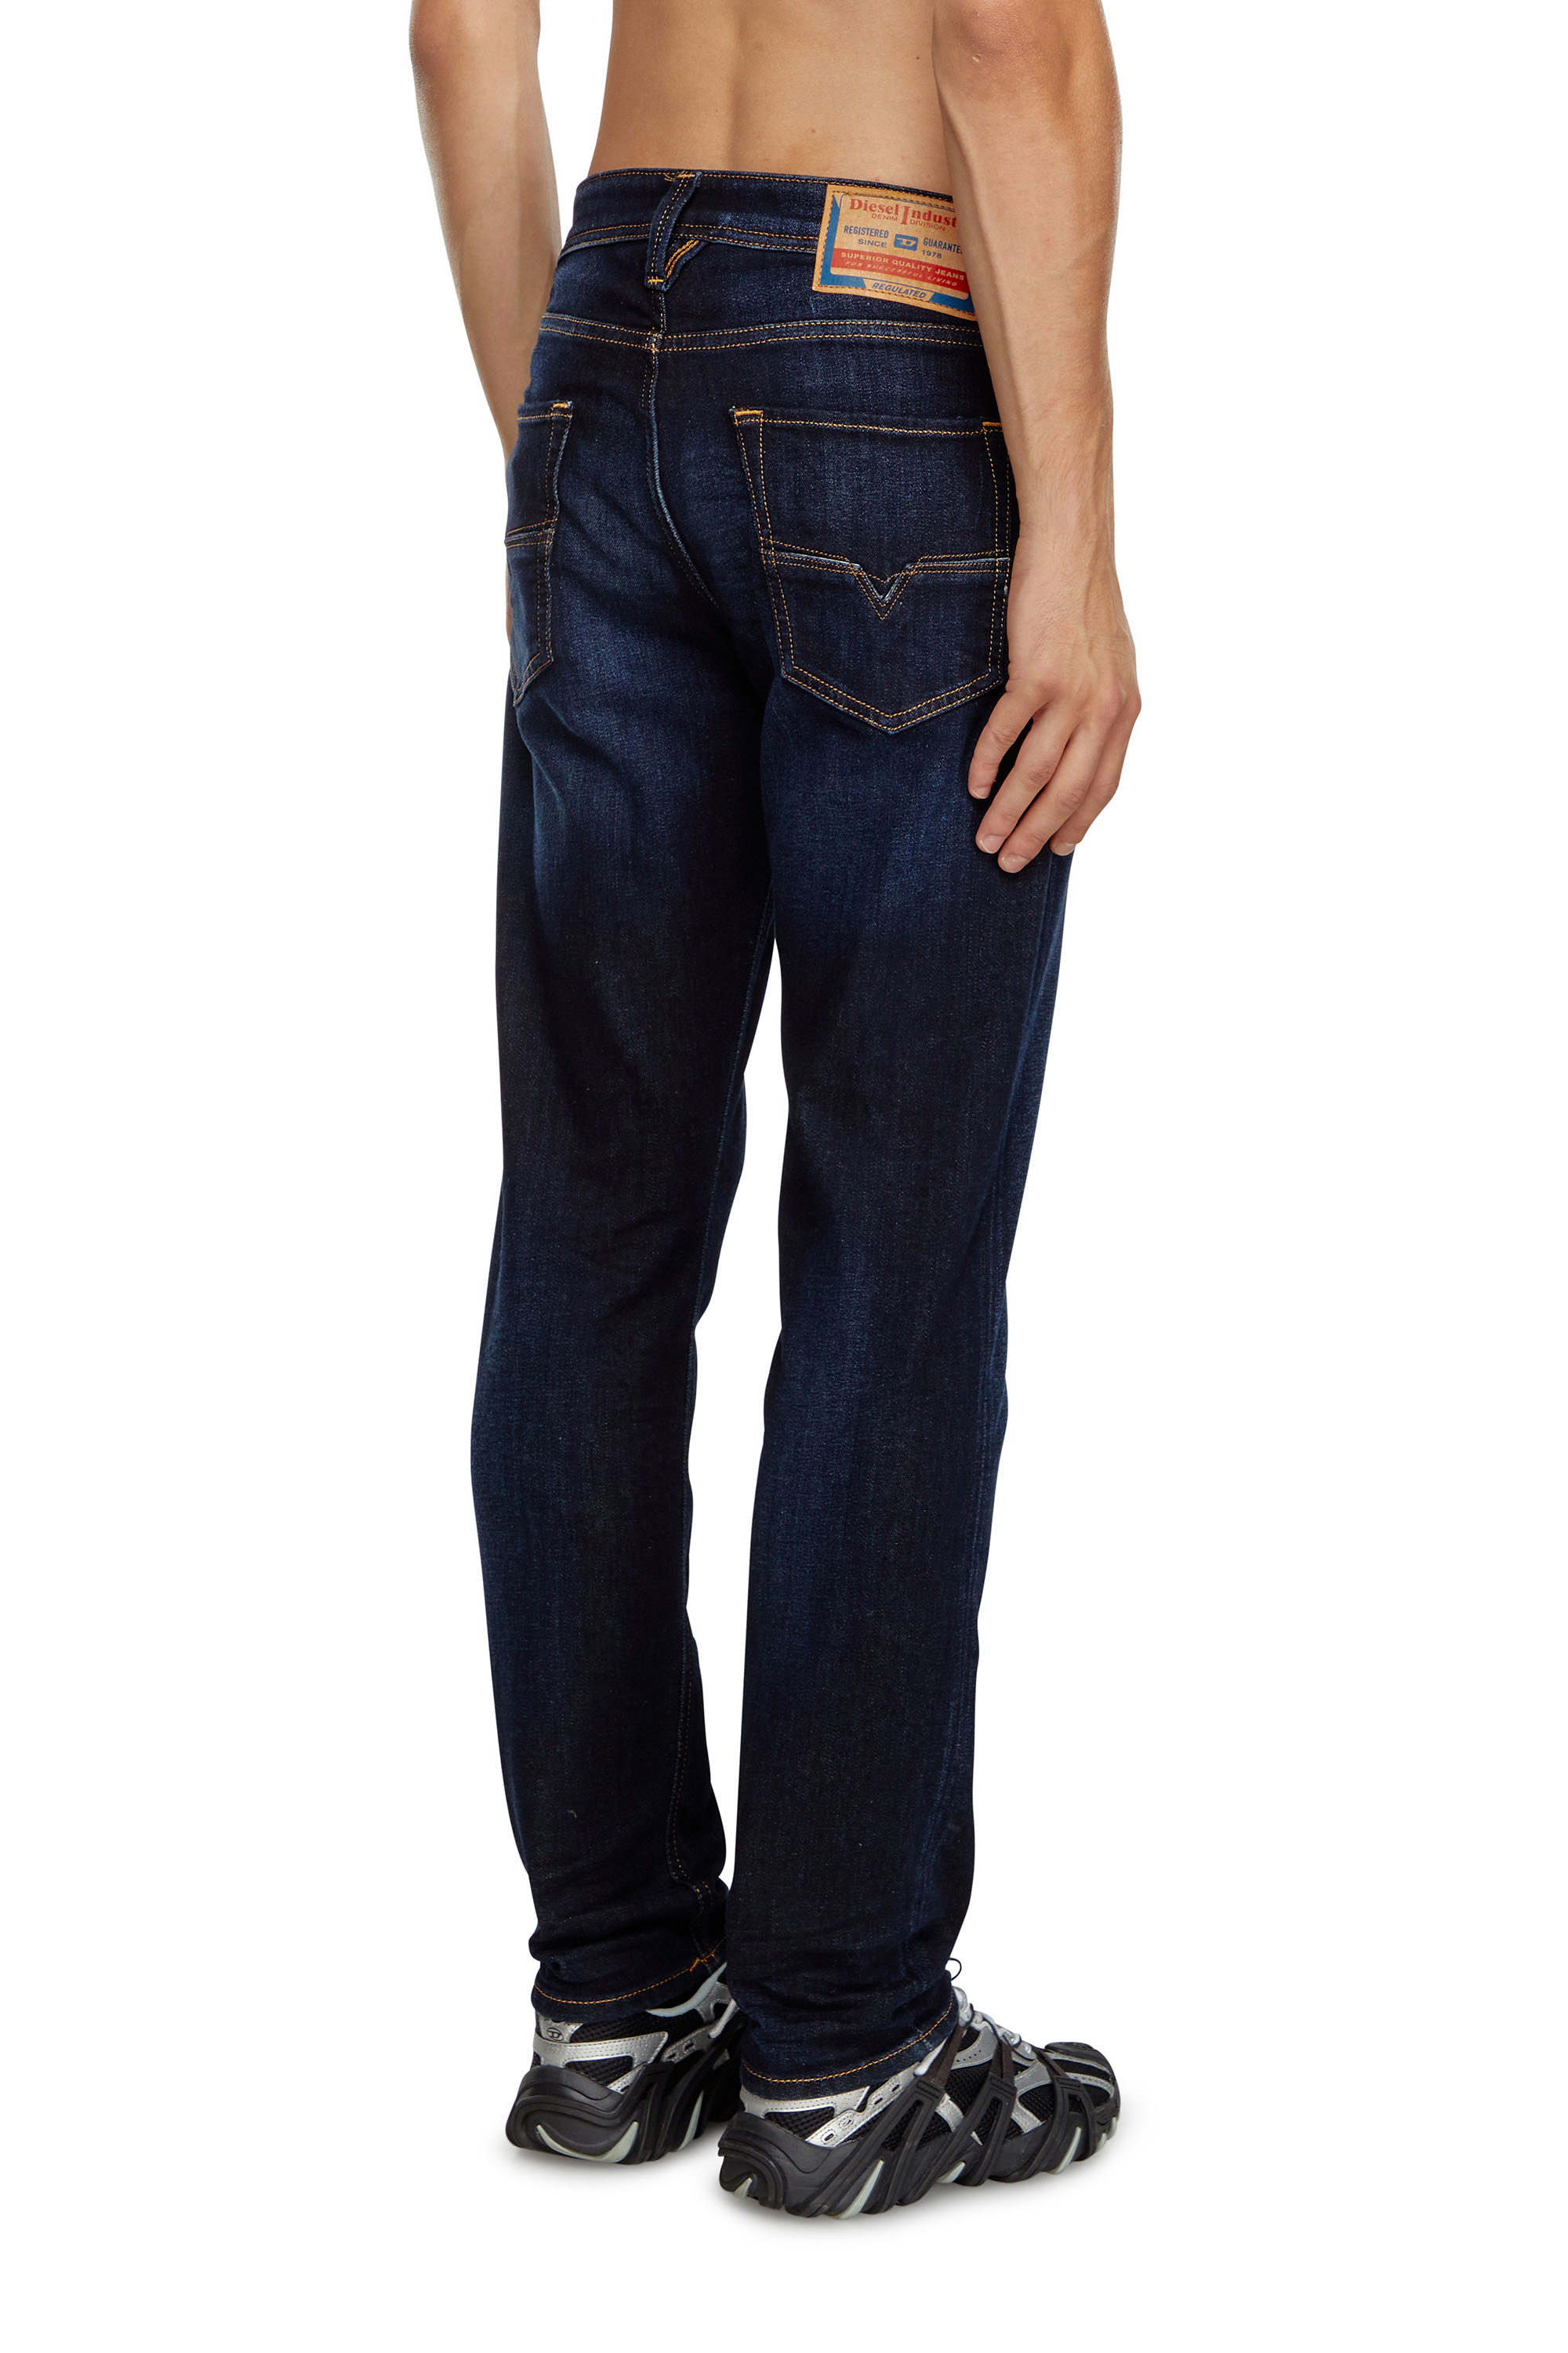 Diesel - Tapered Jeans 1986 Larkee-Beex 009ZS, Hombre Tapered Jeans - 1986 Larkee-Beex in Azul marino - Image 3